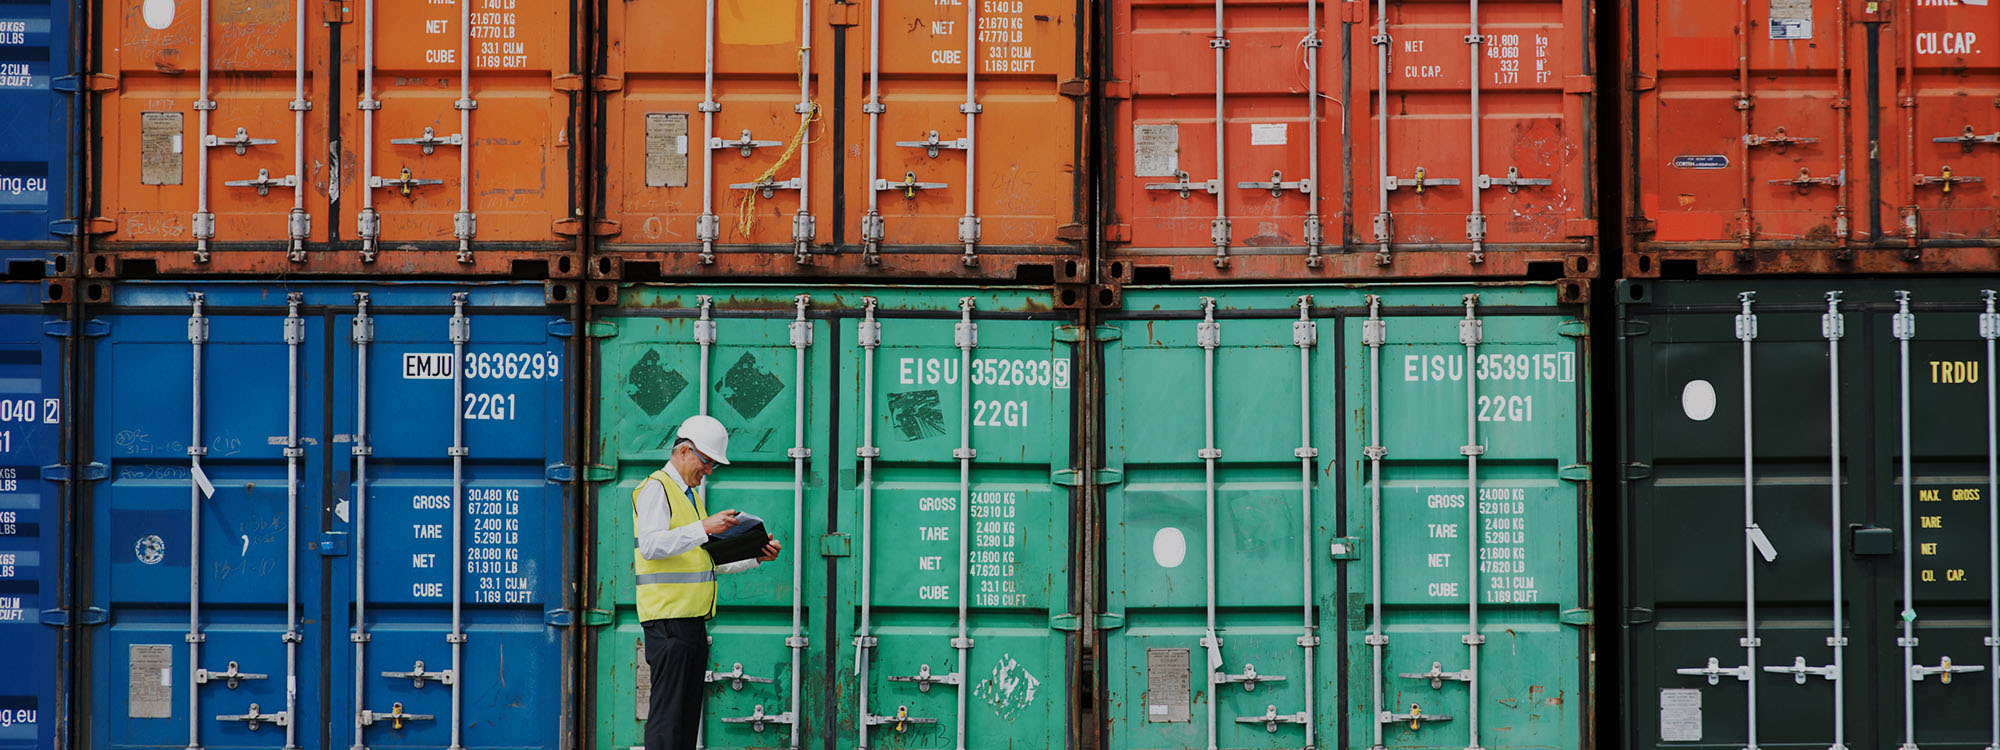 worker taking notes in front of shipping containers